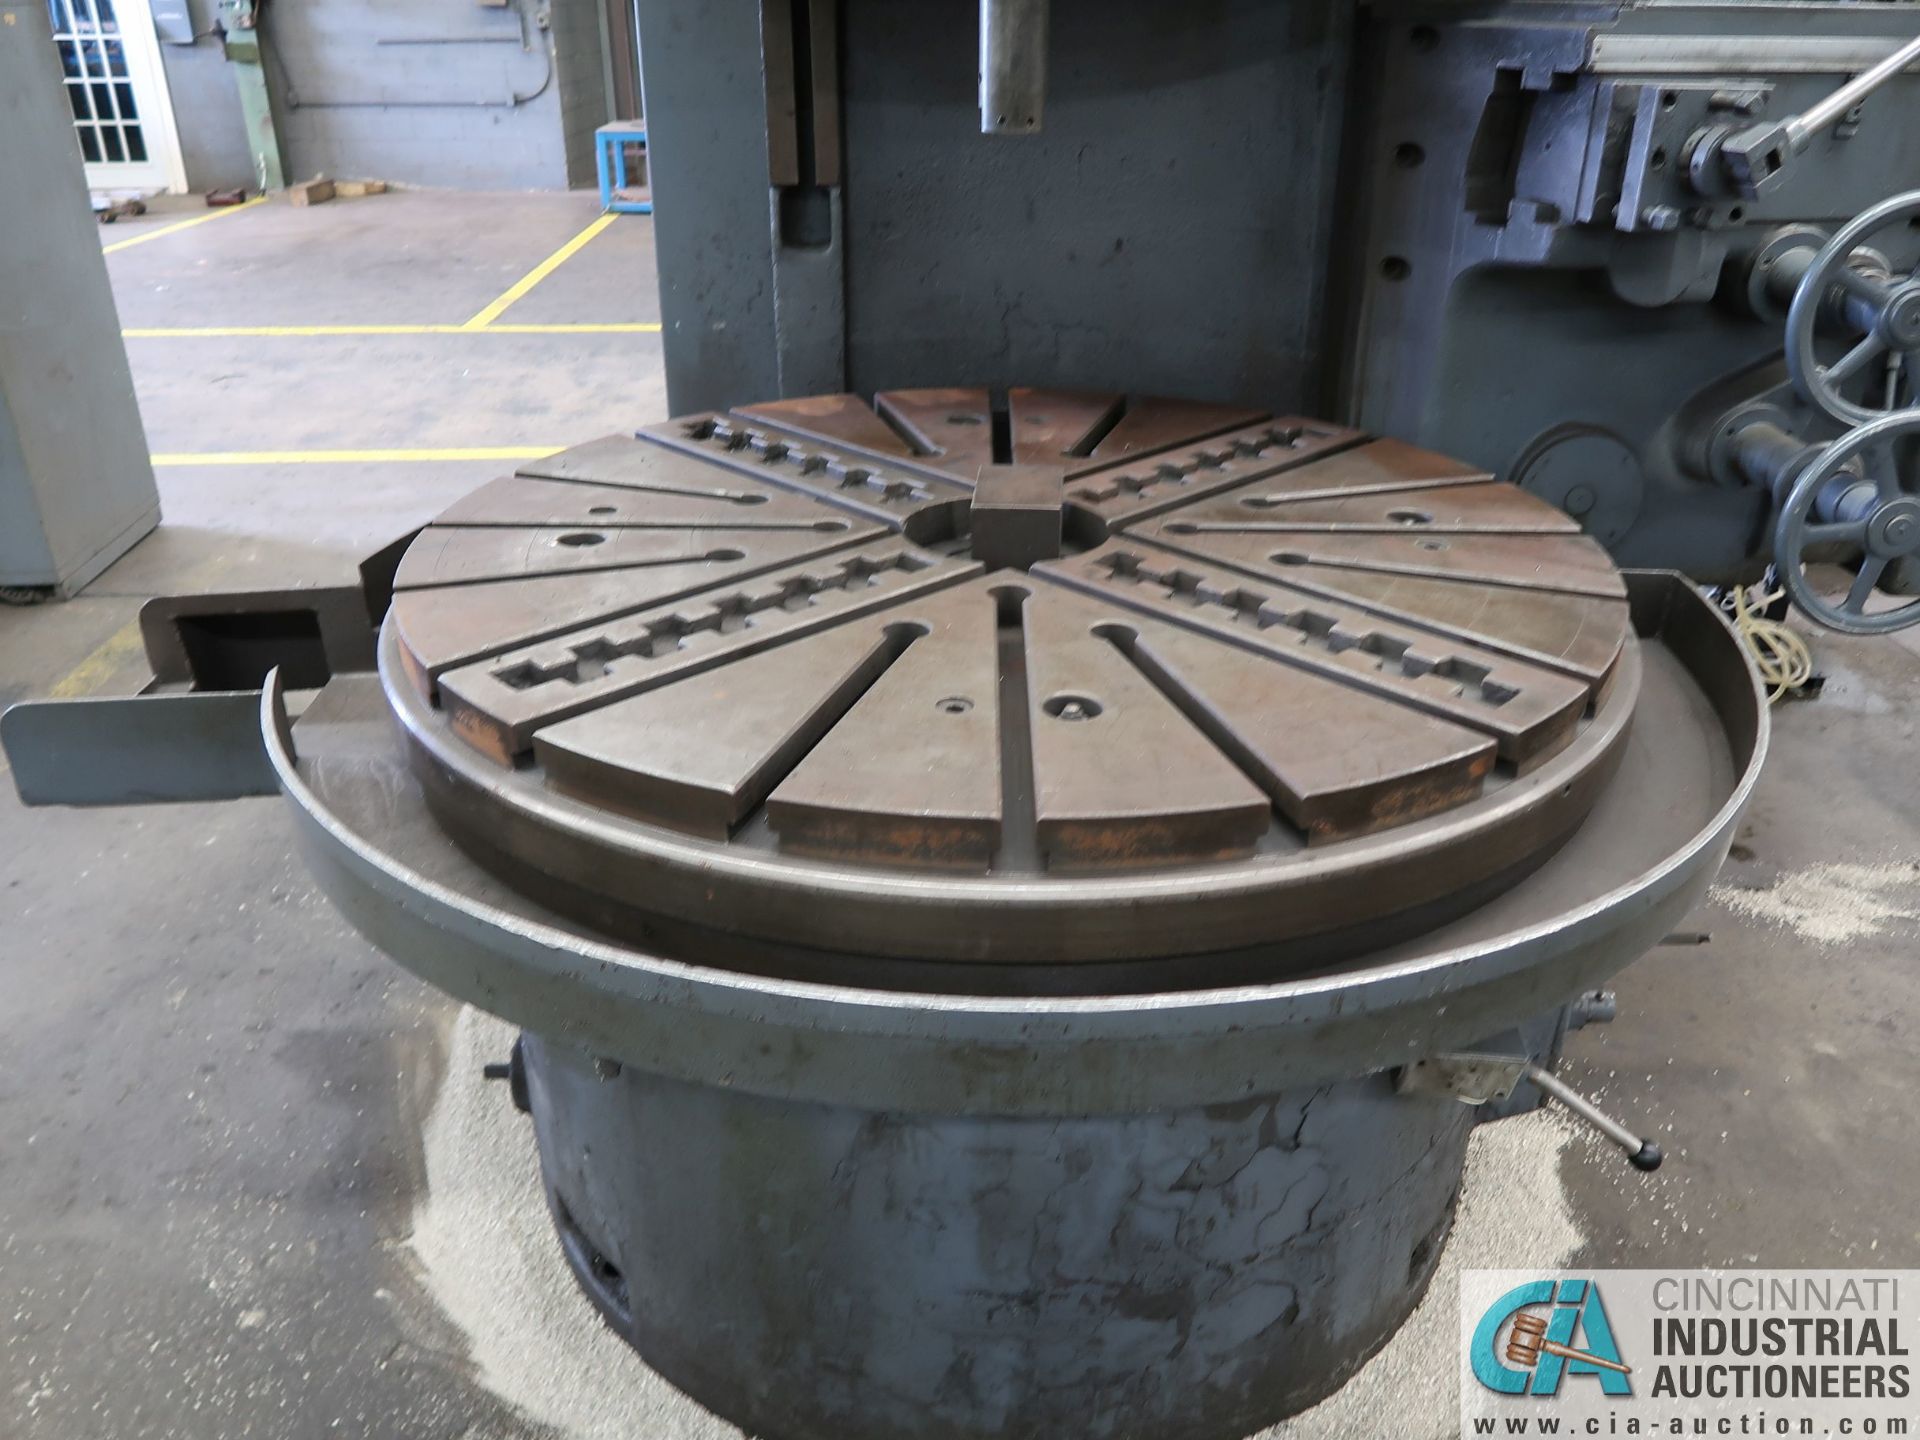 60" SCHIESS VERTICAL TURRET LATHE; S/N N/A, 5-POSITION TURRET - Image 5 of 12